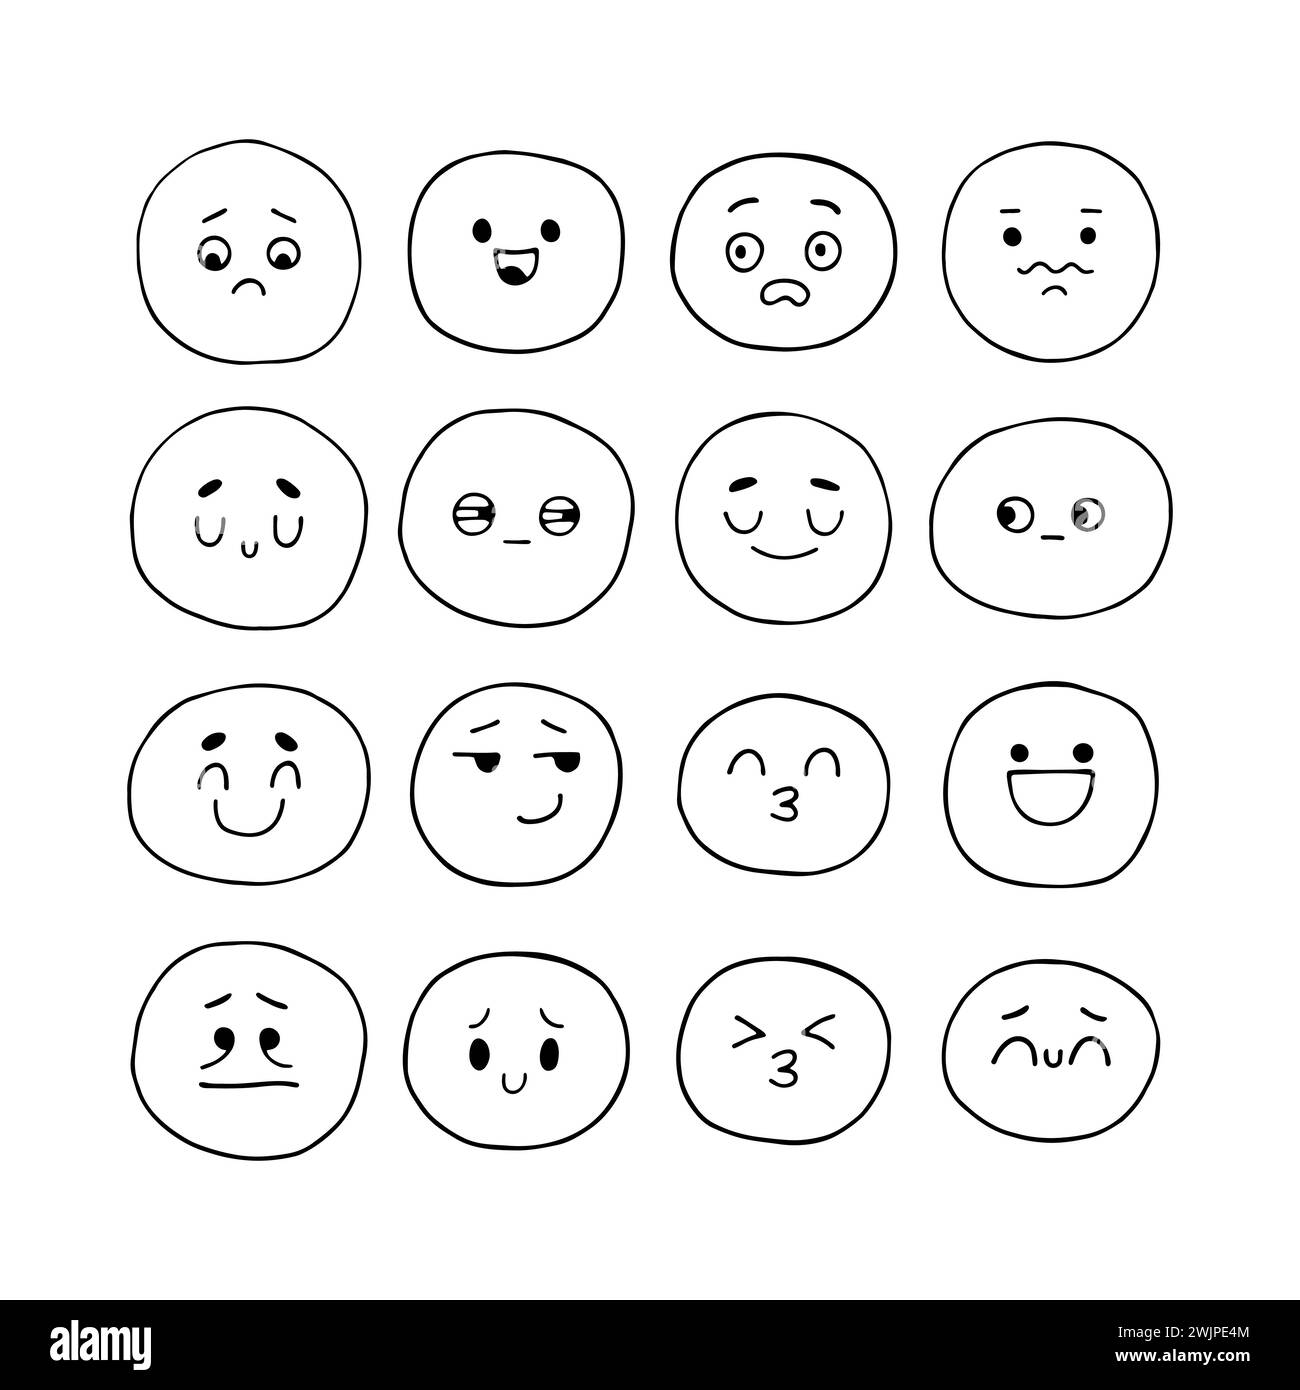 Hand drawn funny smiley faces. Sketched facial expressions set. Kawaii style. Collection of cartoon emotional characters. Emoji icons. Vector illustra Stock Vector